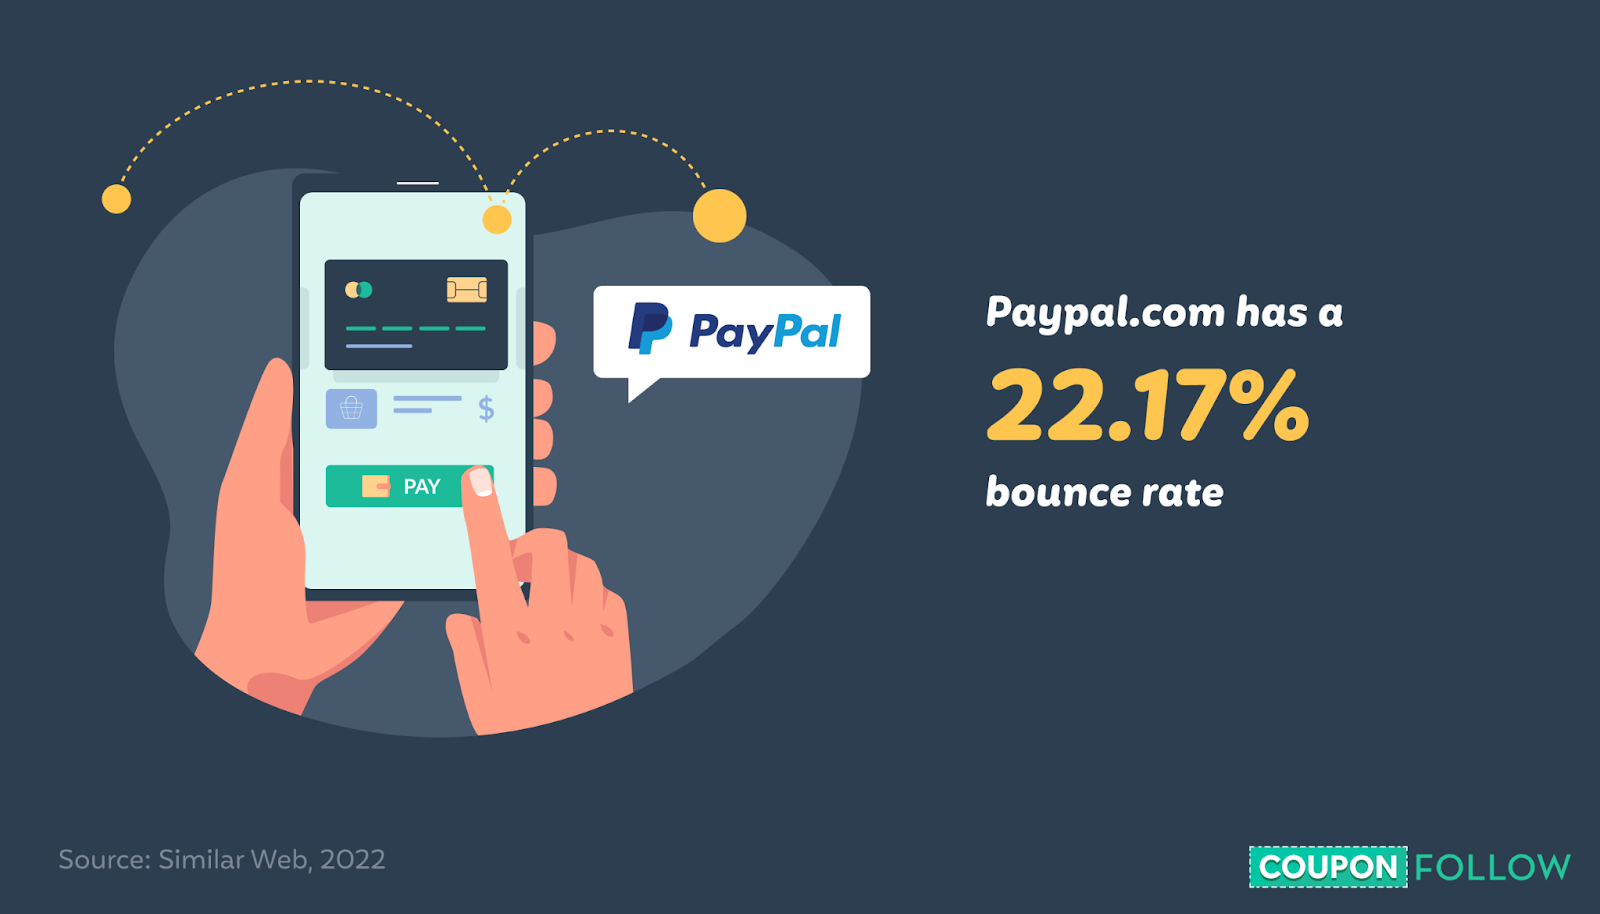 Illustration showing paypal’s website bounce rate